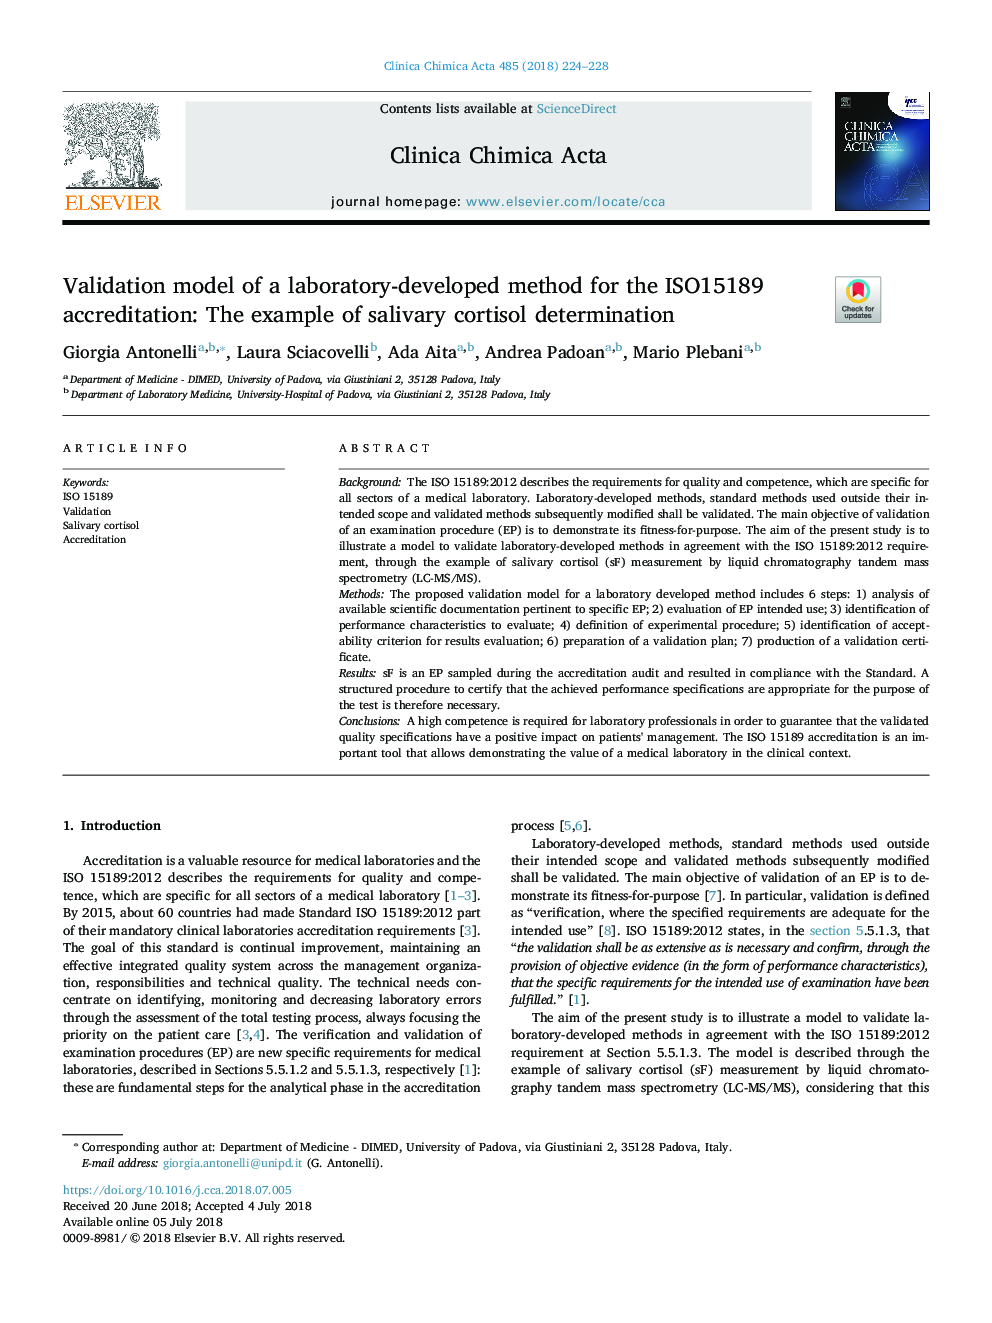 Validation model of a laboratory-developed method for the ISO15189 accreditation: The example of salivary cortisol determination